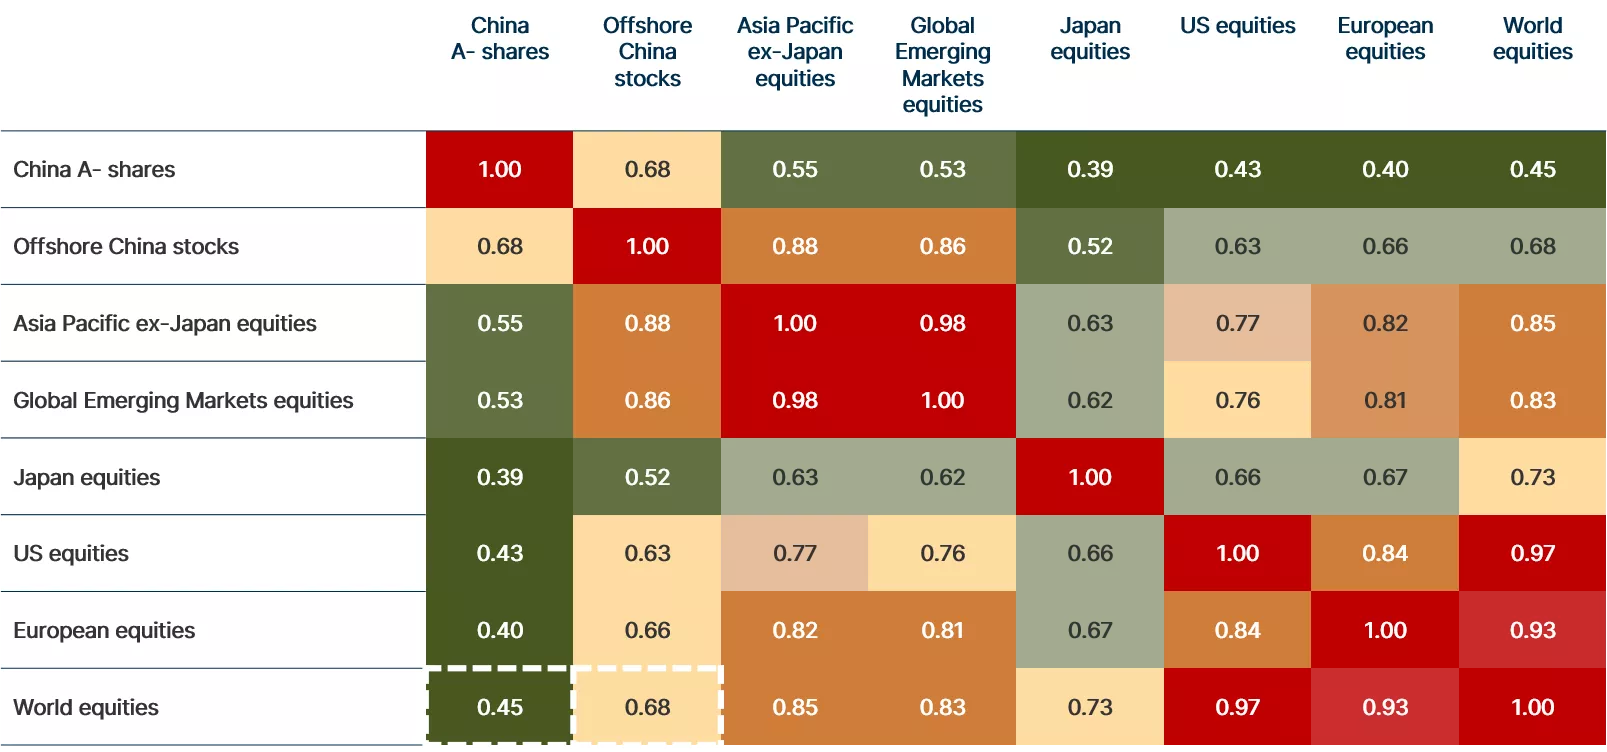 Correlation of China A-shares and offshore stocks to global equities